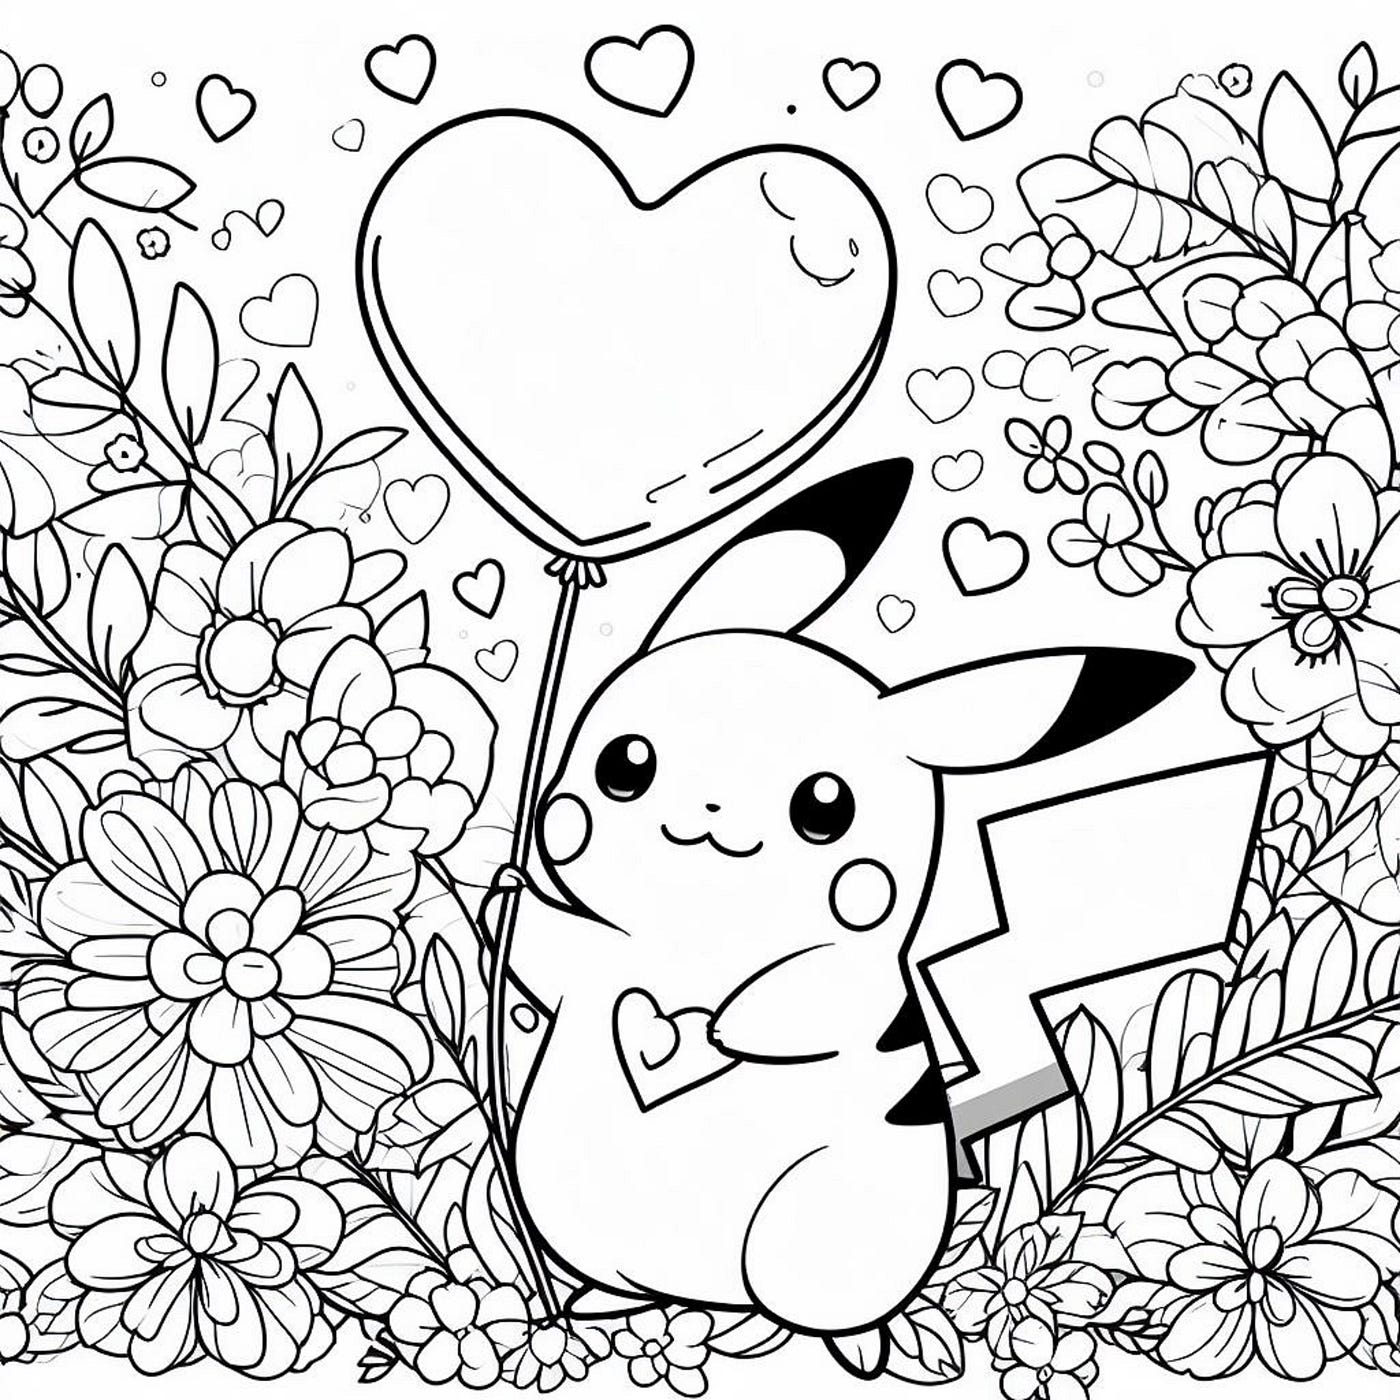 pokemon-coloring-pages-eevee, coloring pages for kids, coloring pages for  kids boys, printable …